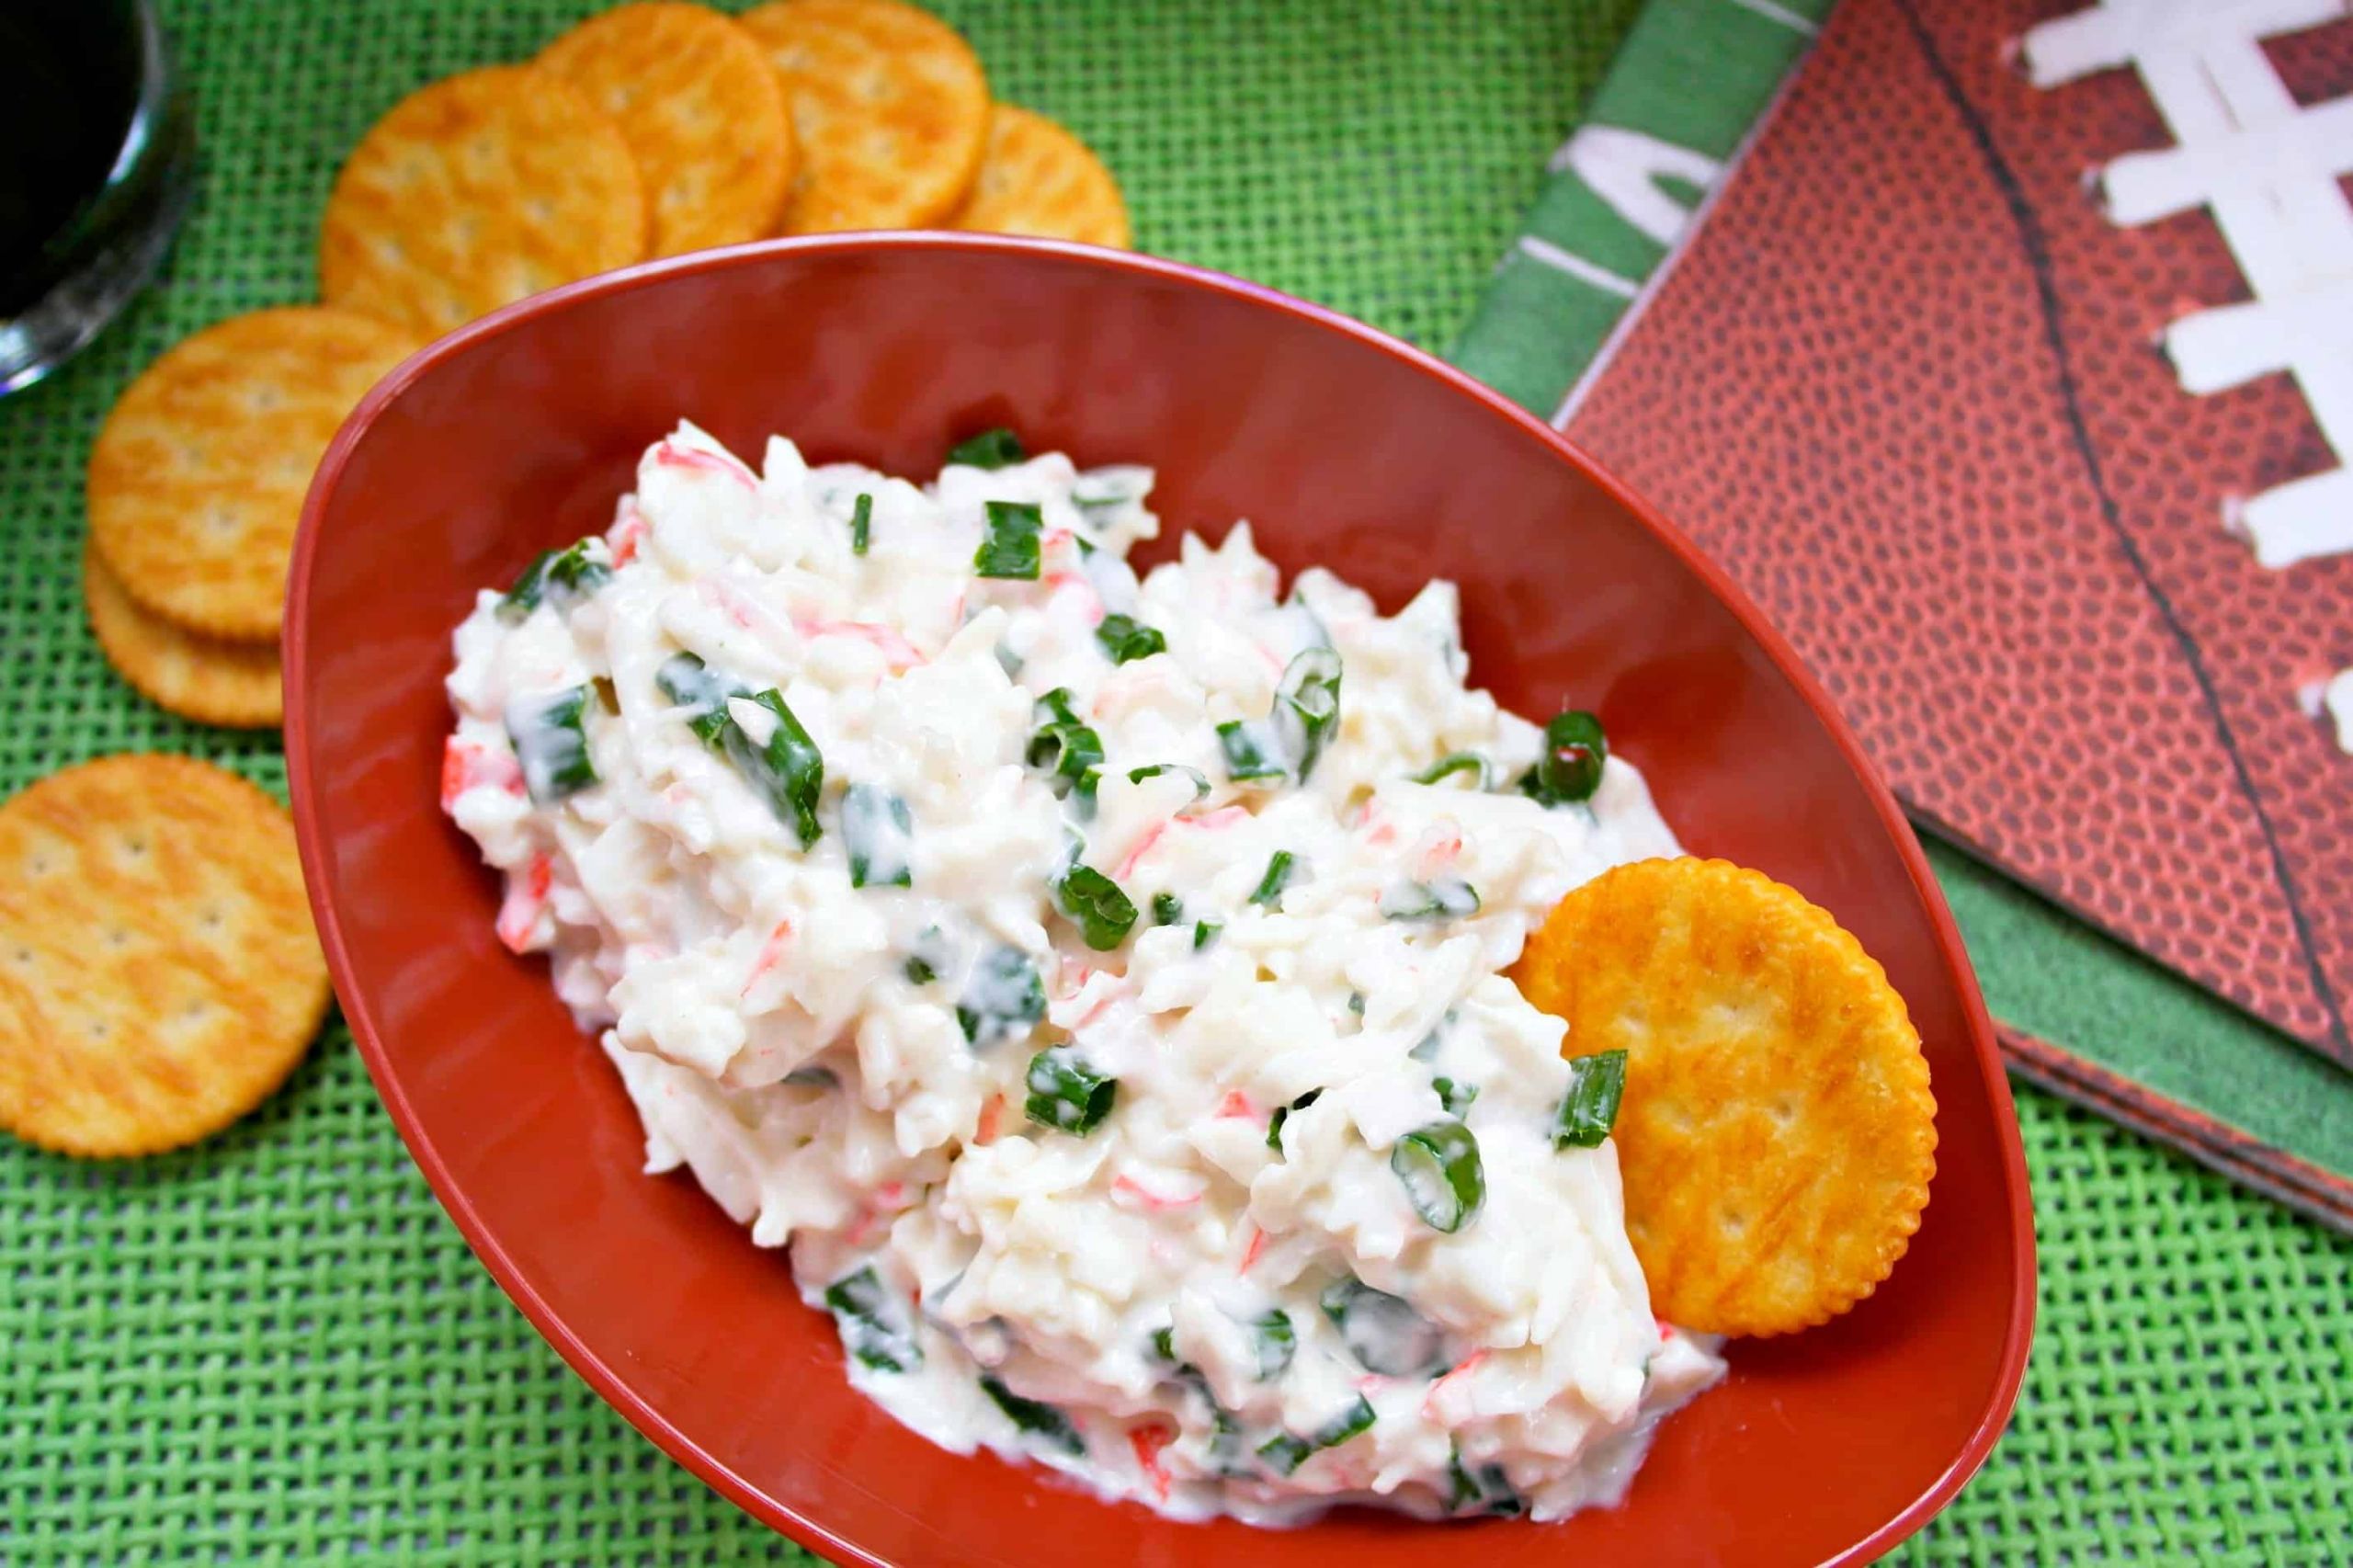 Crab Meat Appetizer Recipe
 Make Ahead Cold Crab Dip Teaspoon Goodness